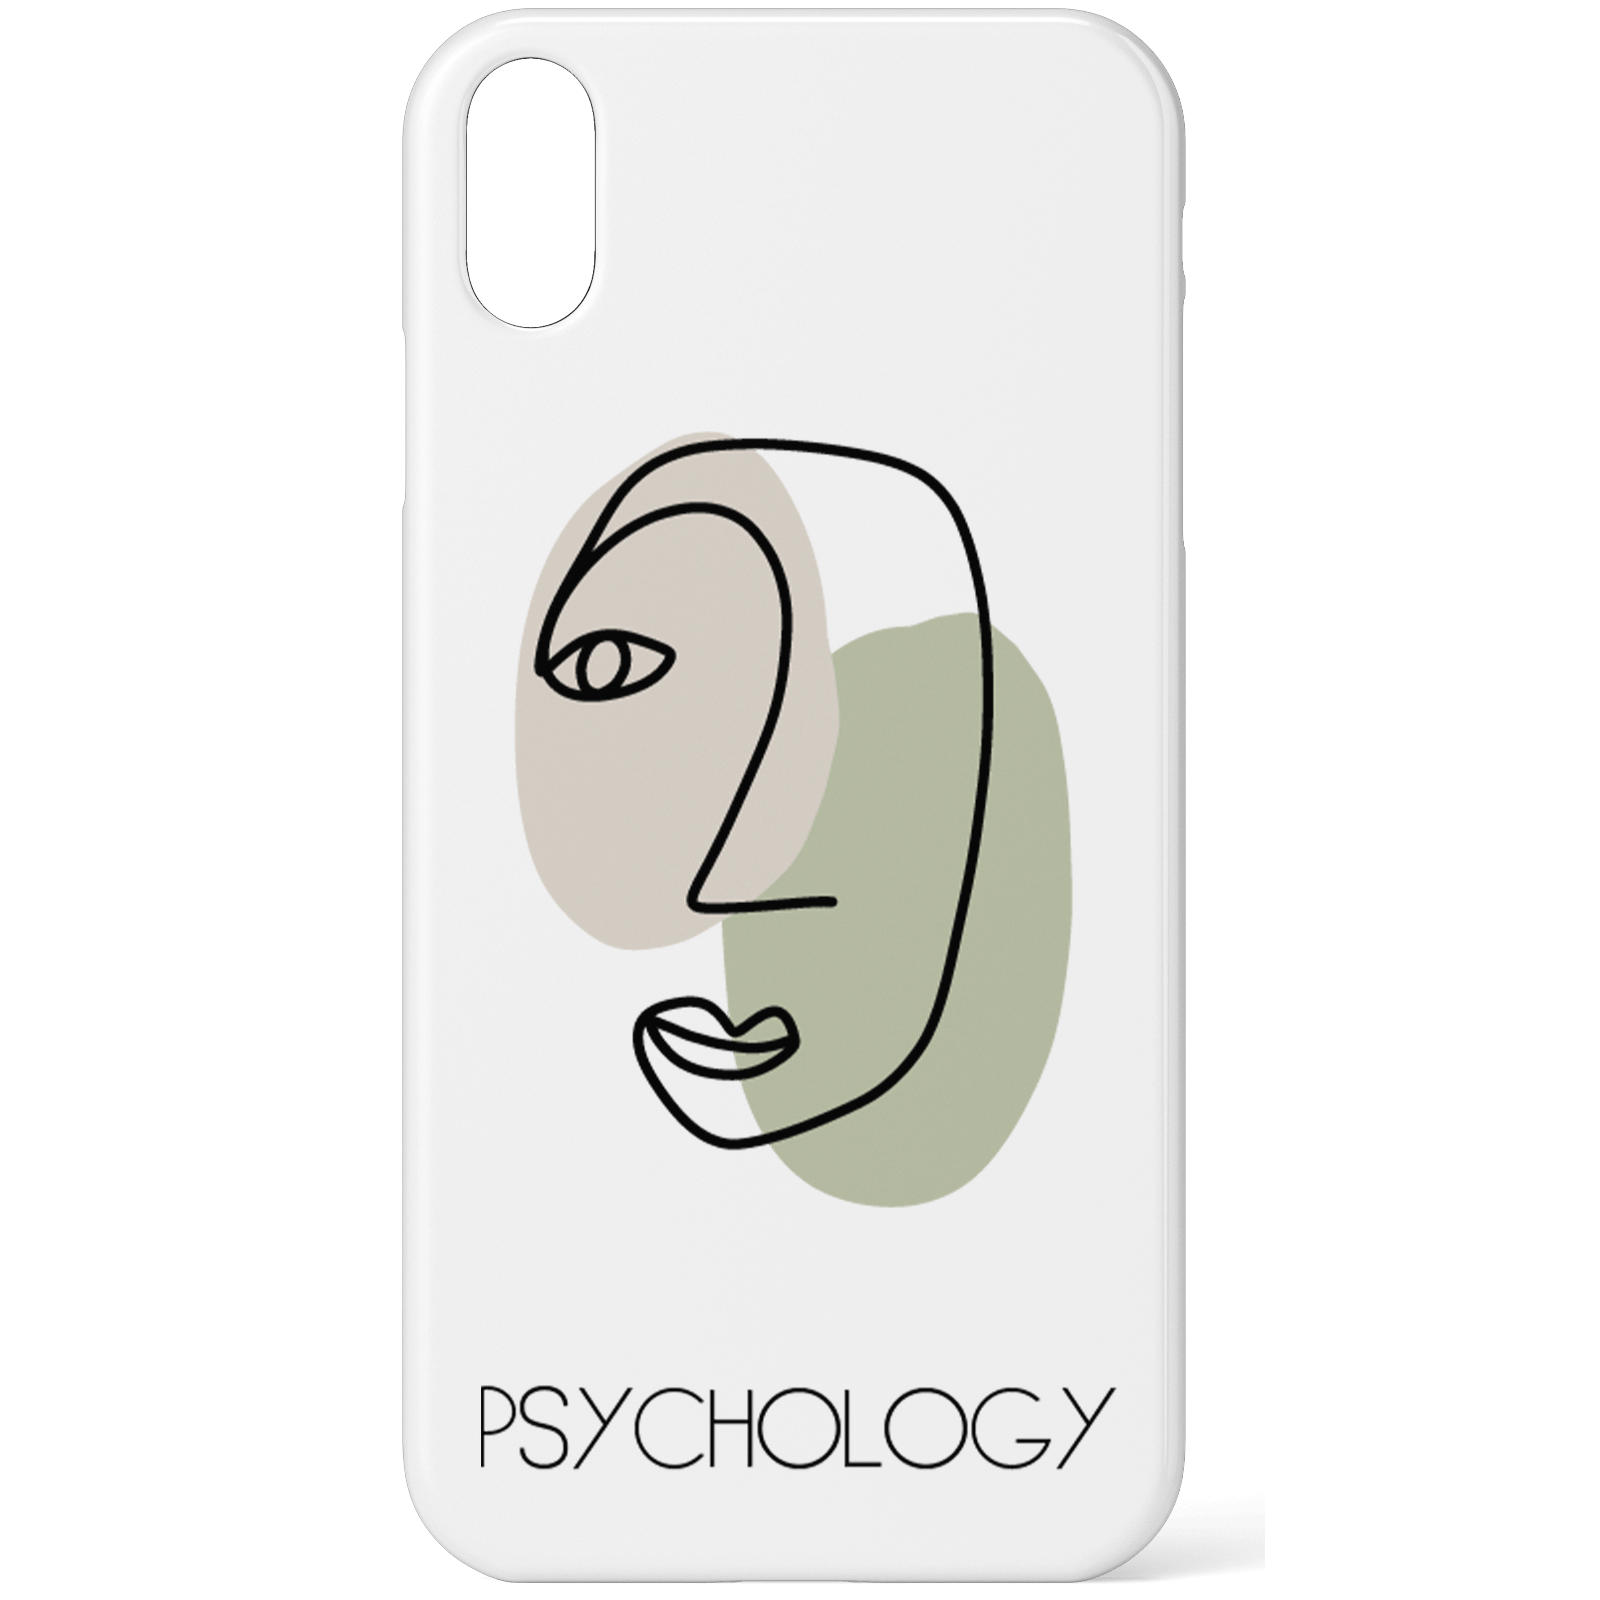 Psychology Phone Case for iPhone and Android - iPhone 5/5s - Snap Case - Matte